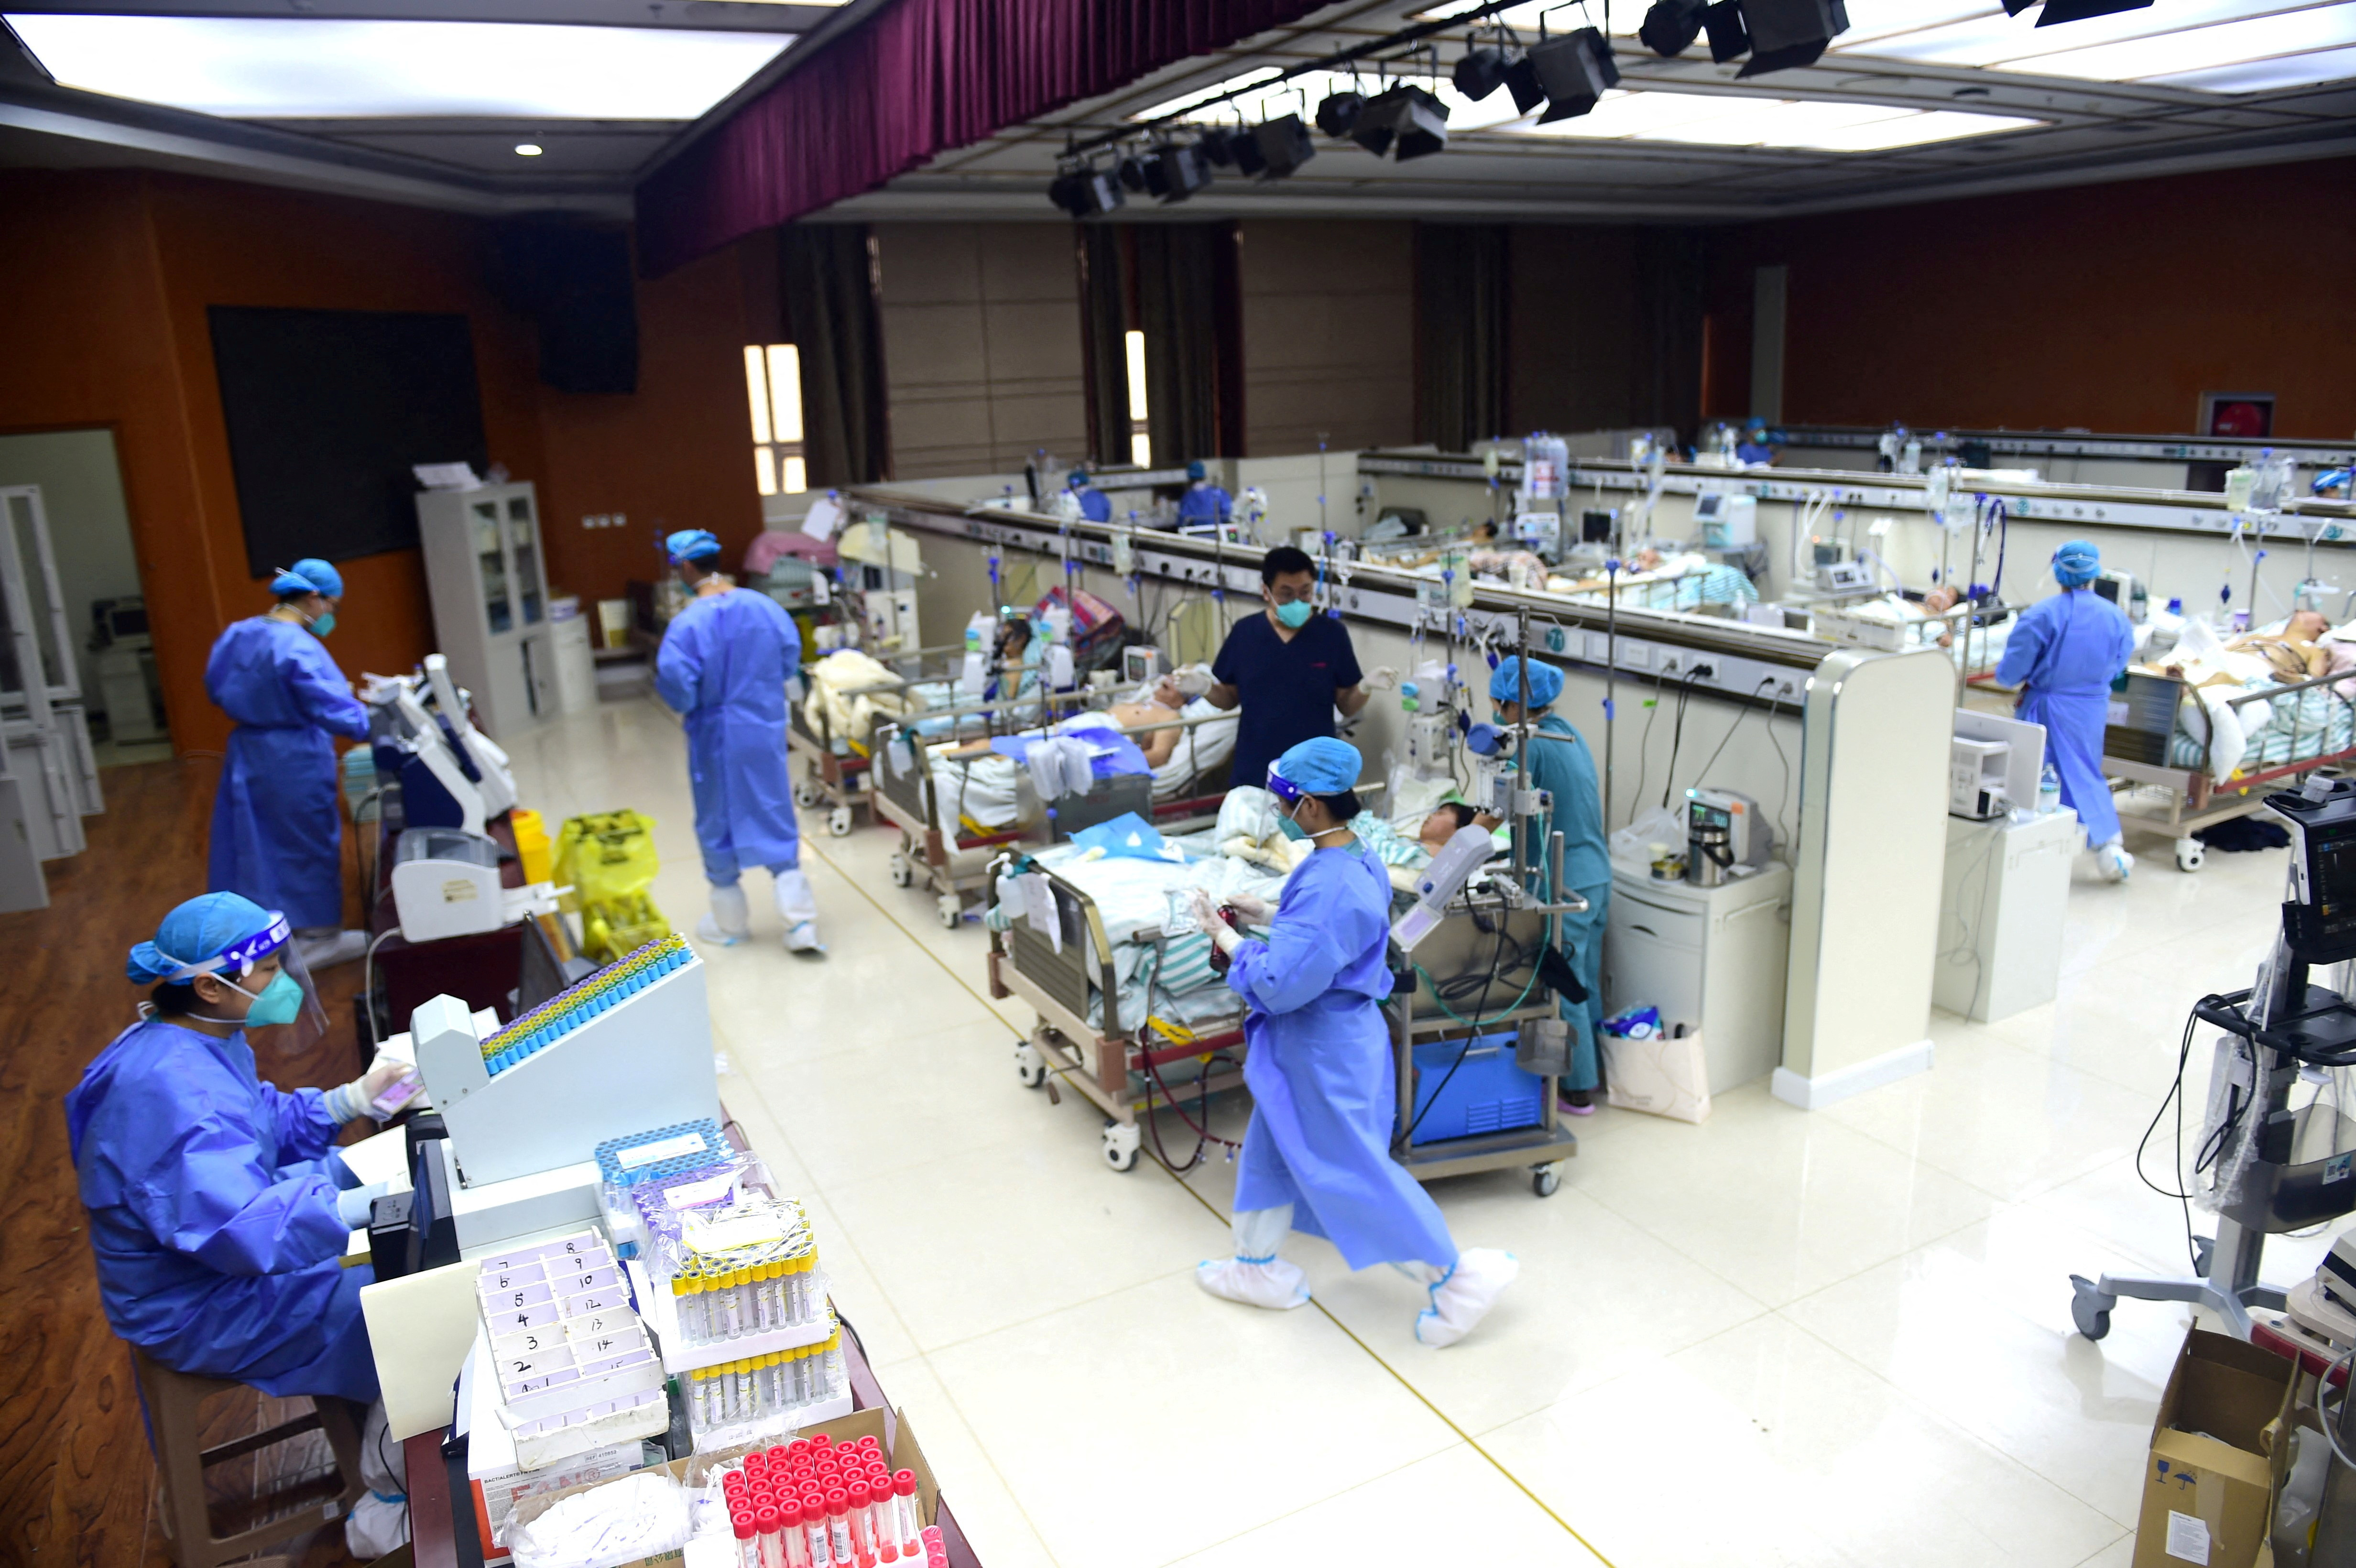 ICU converted from a conference room at a hospital in Cangzhou